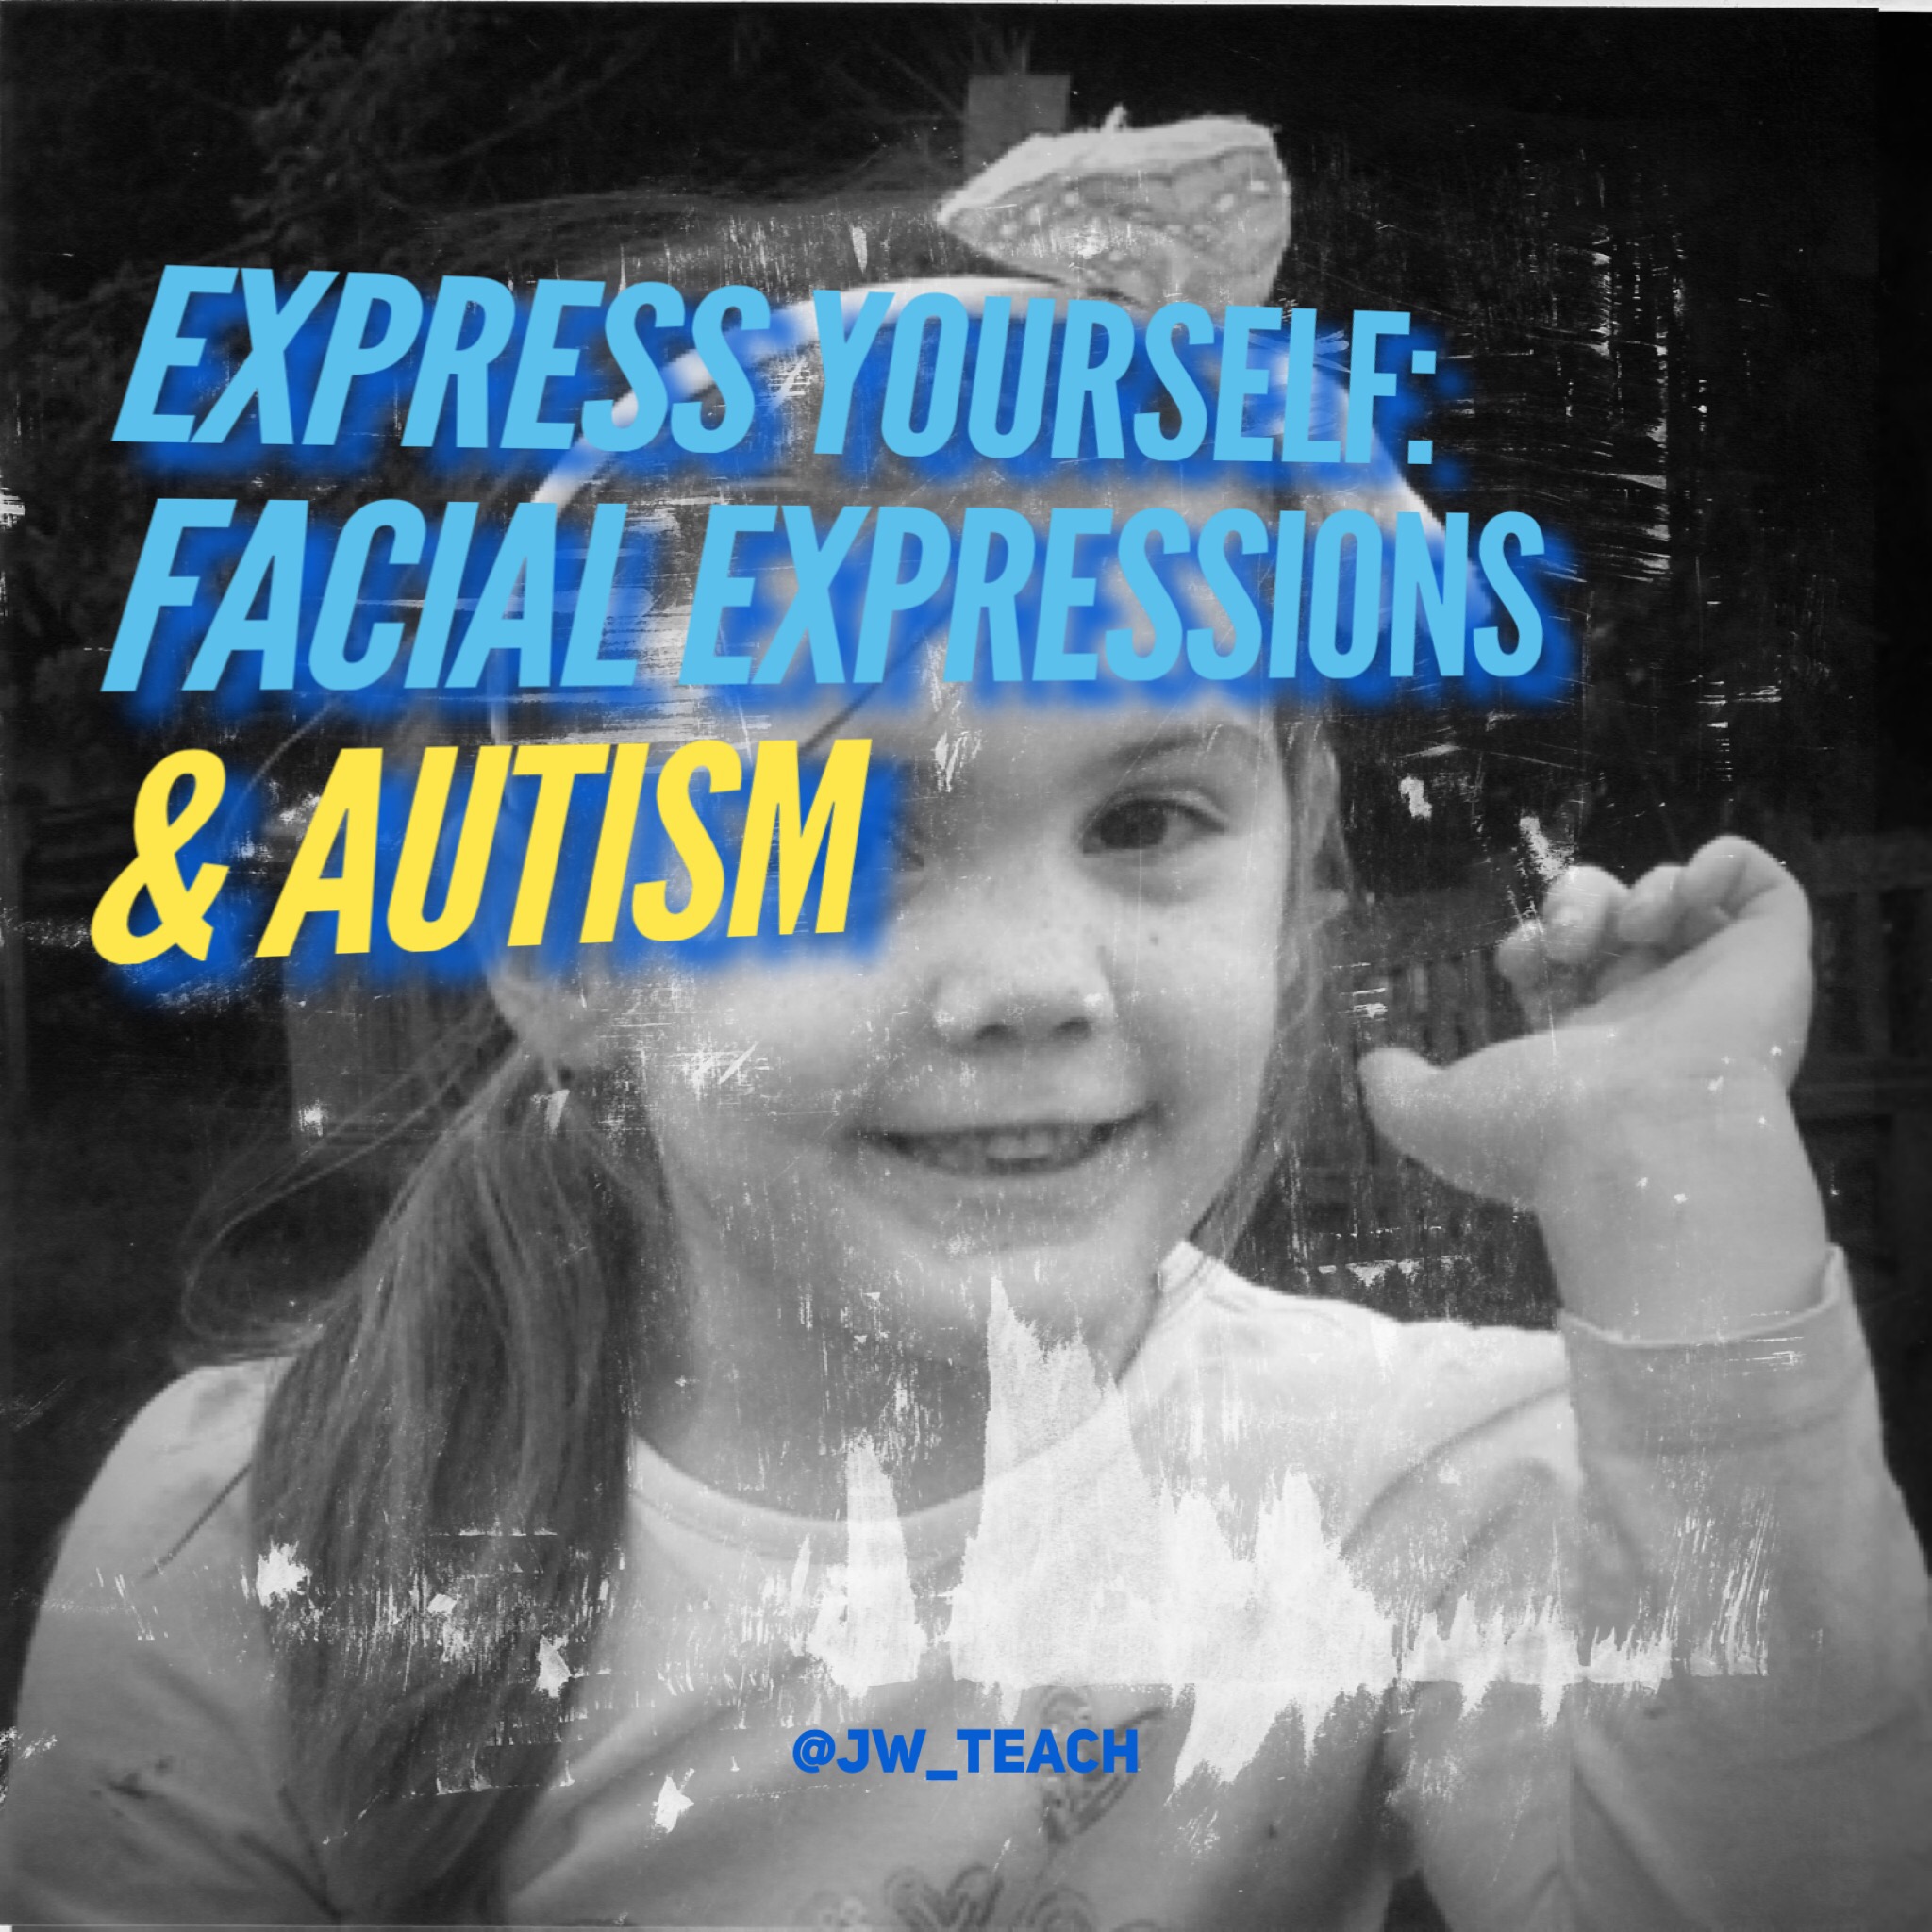 Autism: Facial Expressions and Interactions